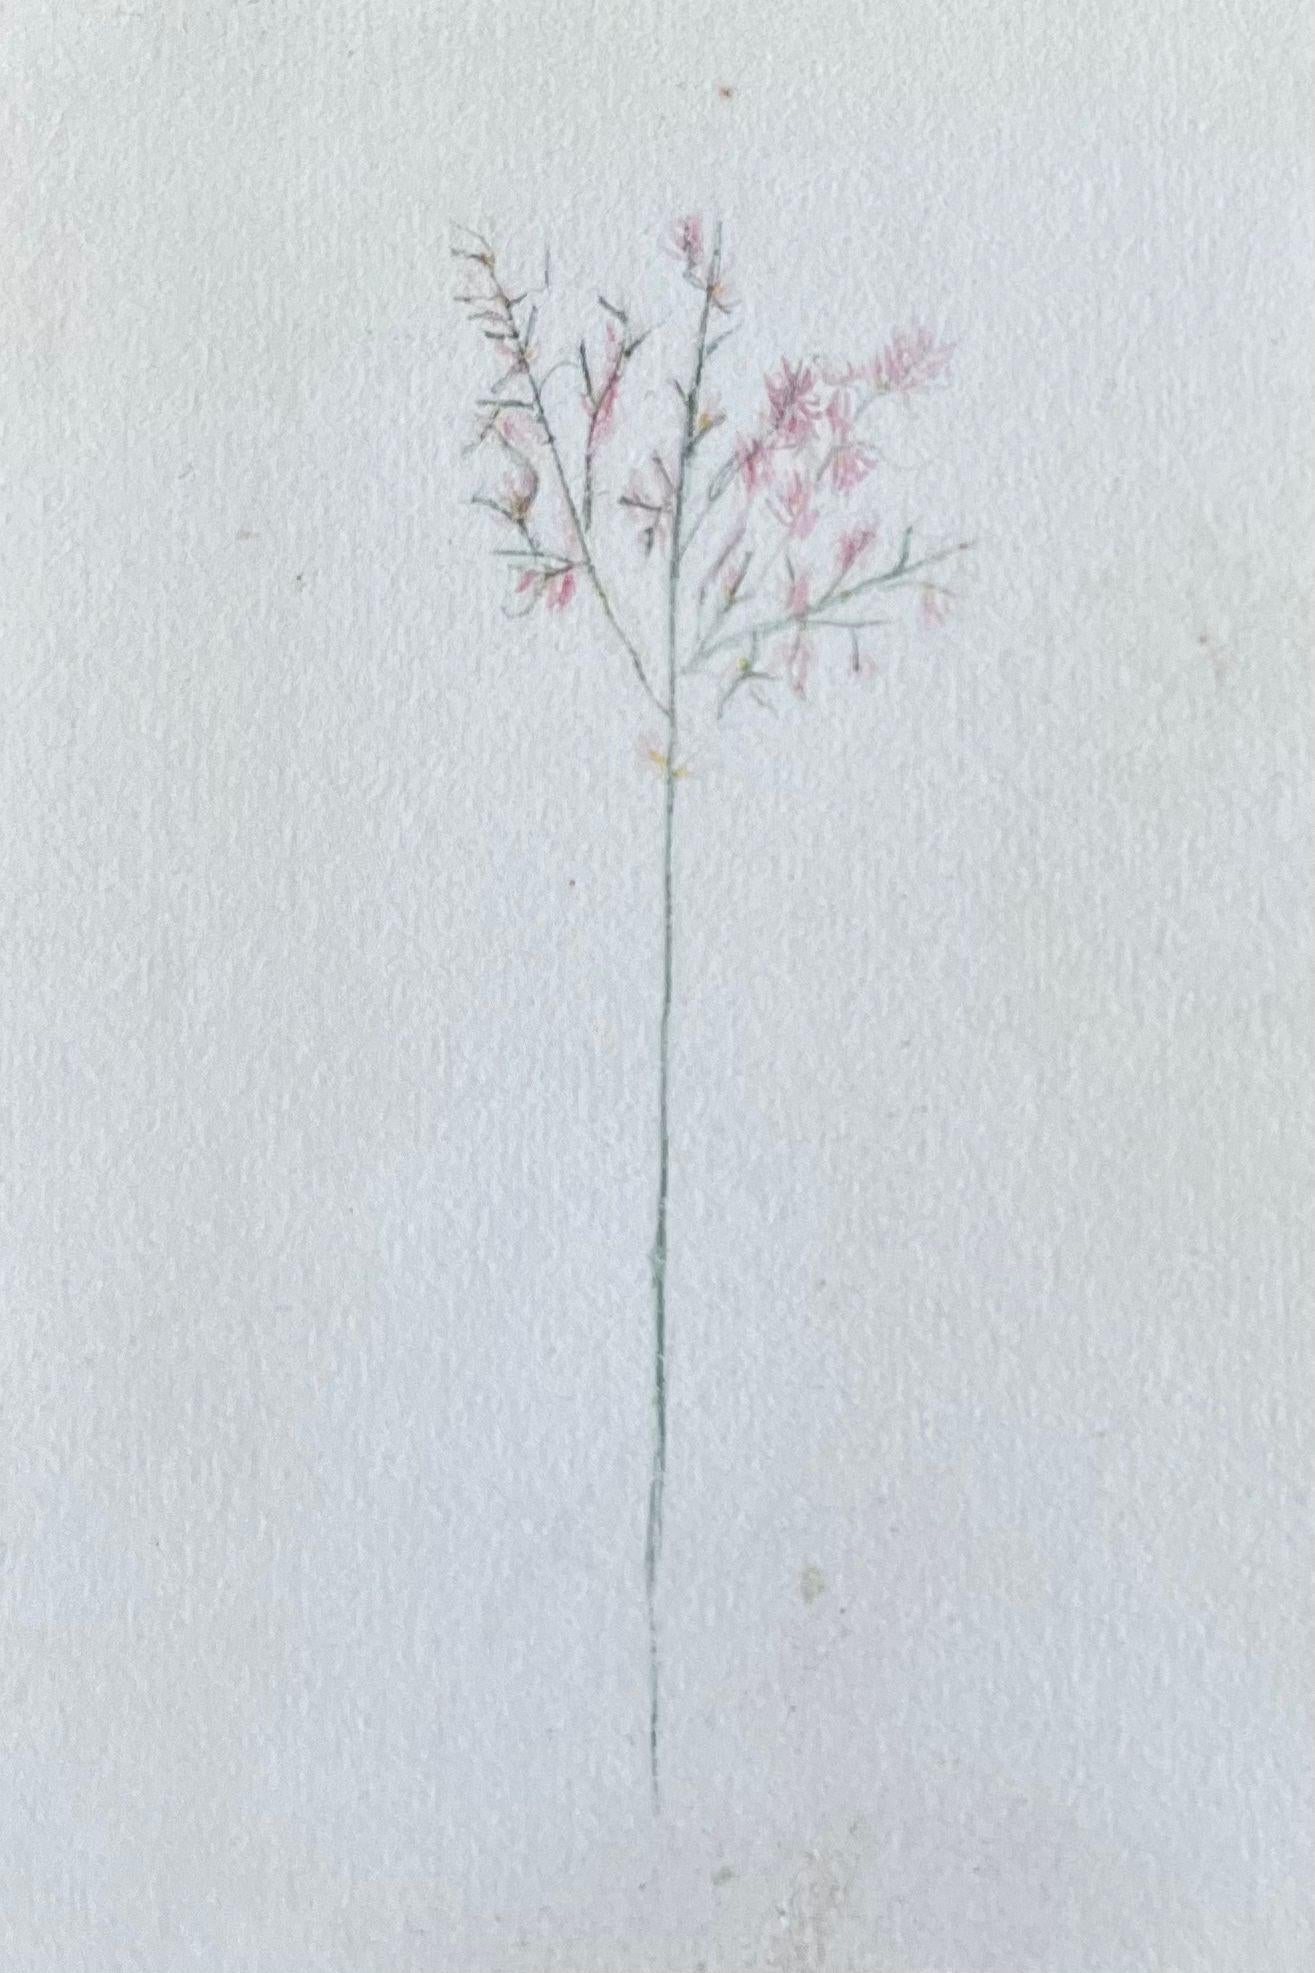 Two very fine original antique English botanical watercolour paintings depicting this beautiful depiction of a flower/ plant. The work came to us from a private collection in Surrey, England and had been part of an album of works assembled by the